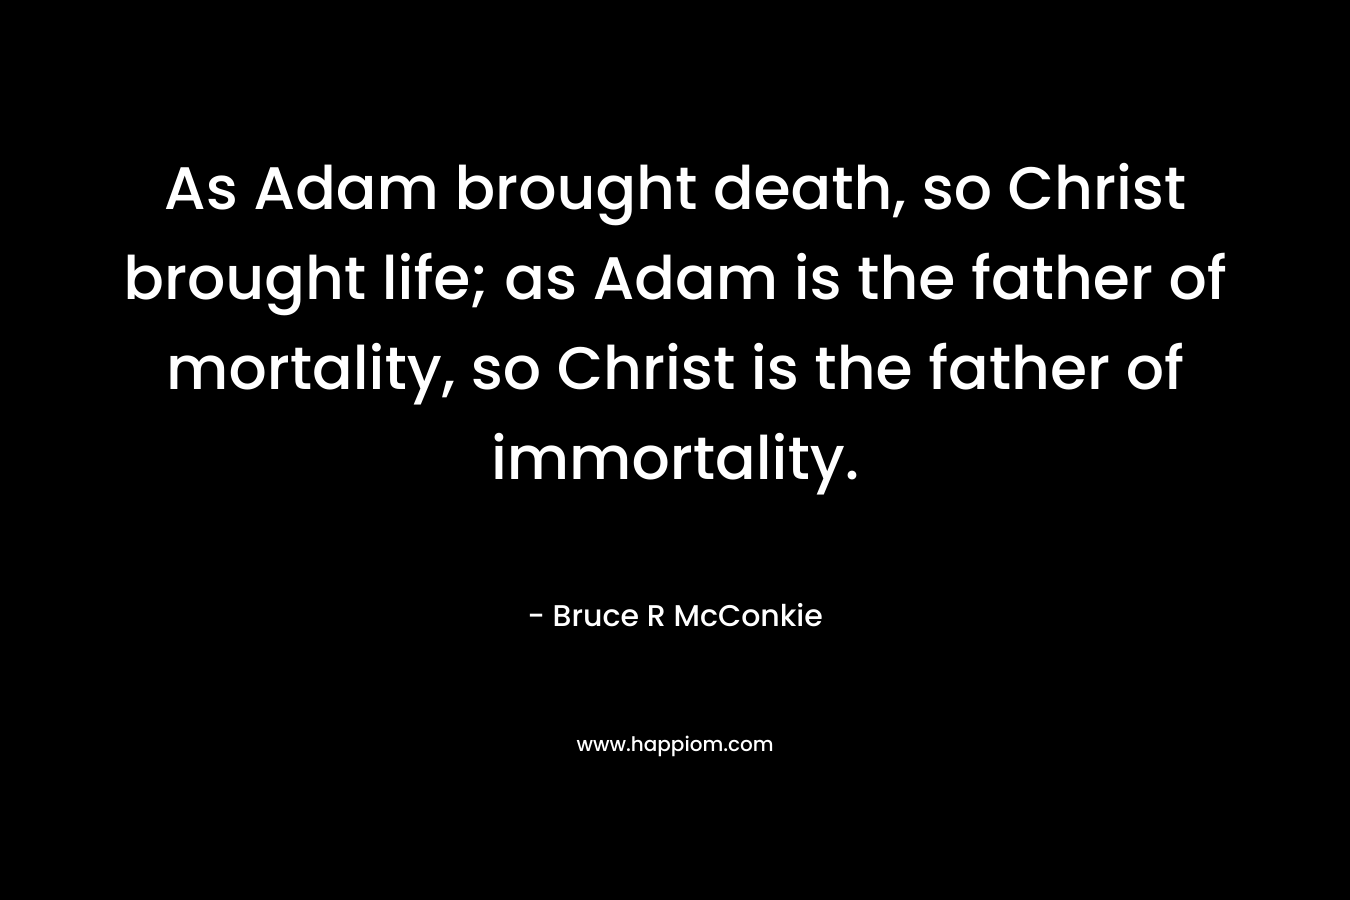 As Adam brought death, so Christ brought life; as Adam is the father of mortality, so Christ is the father of immortality.